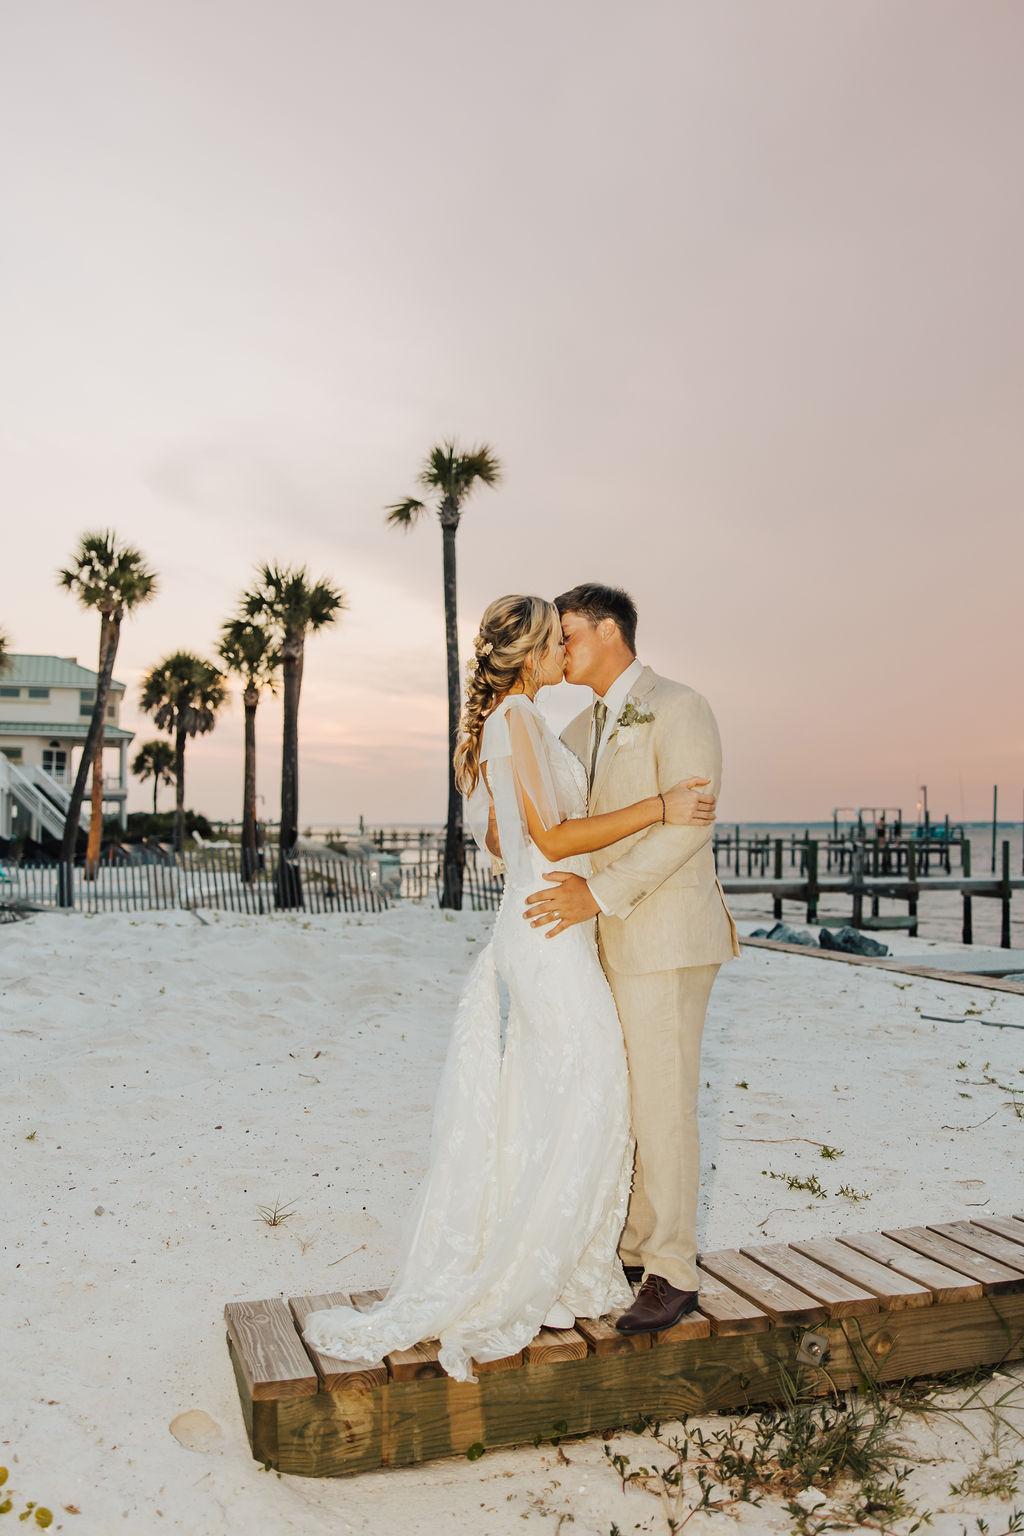 Gorgeous sunset beach wedding photo with couple. Full service Wedding Planning for destination bride.